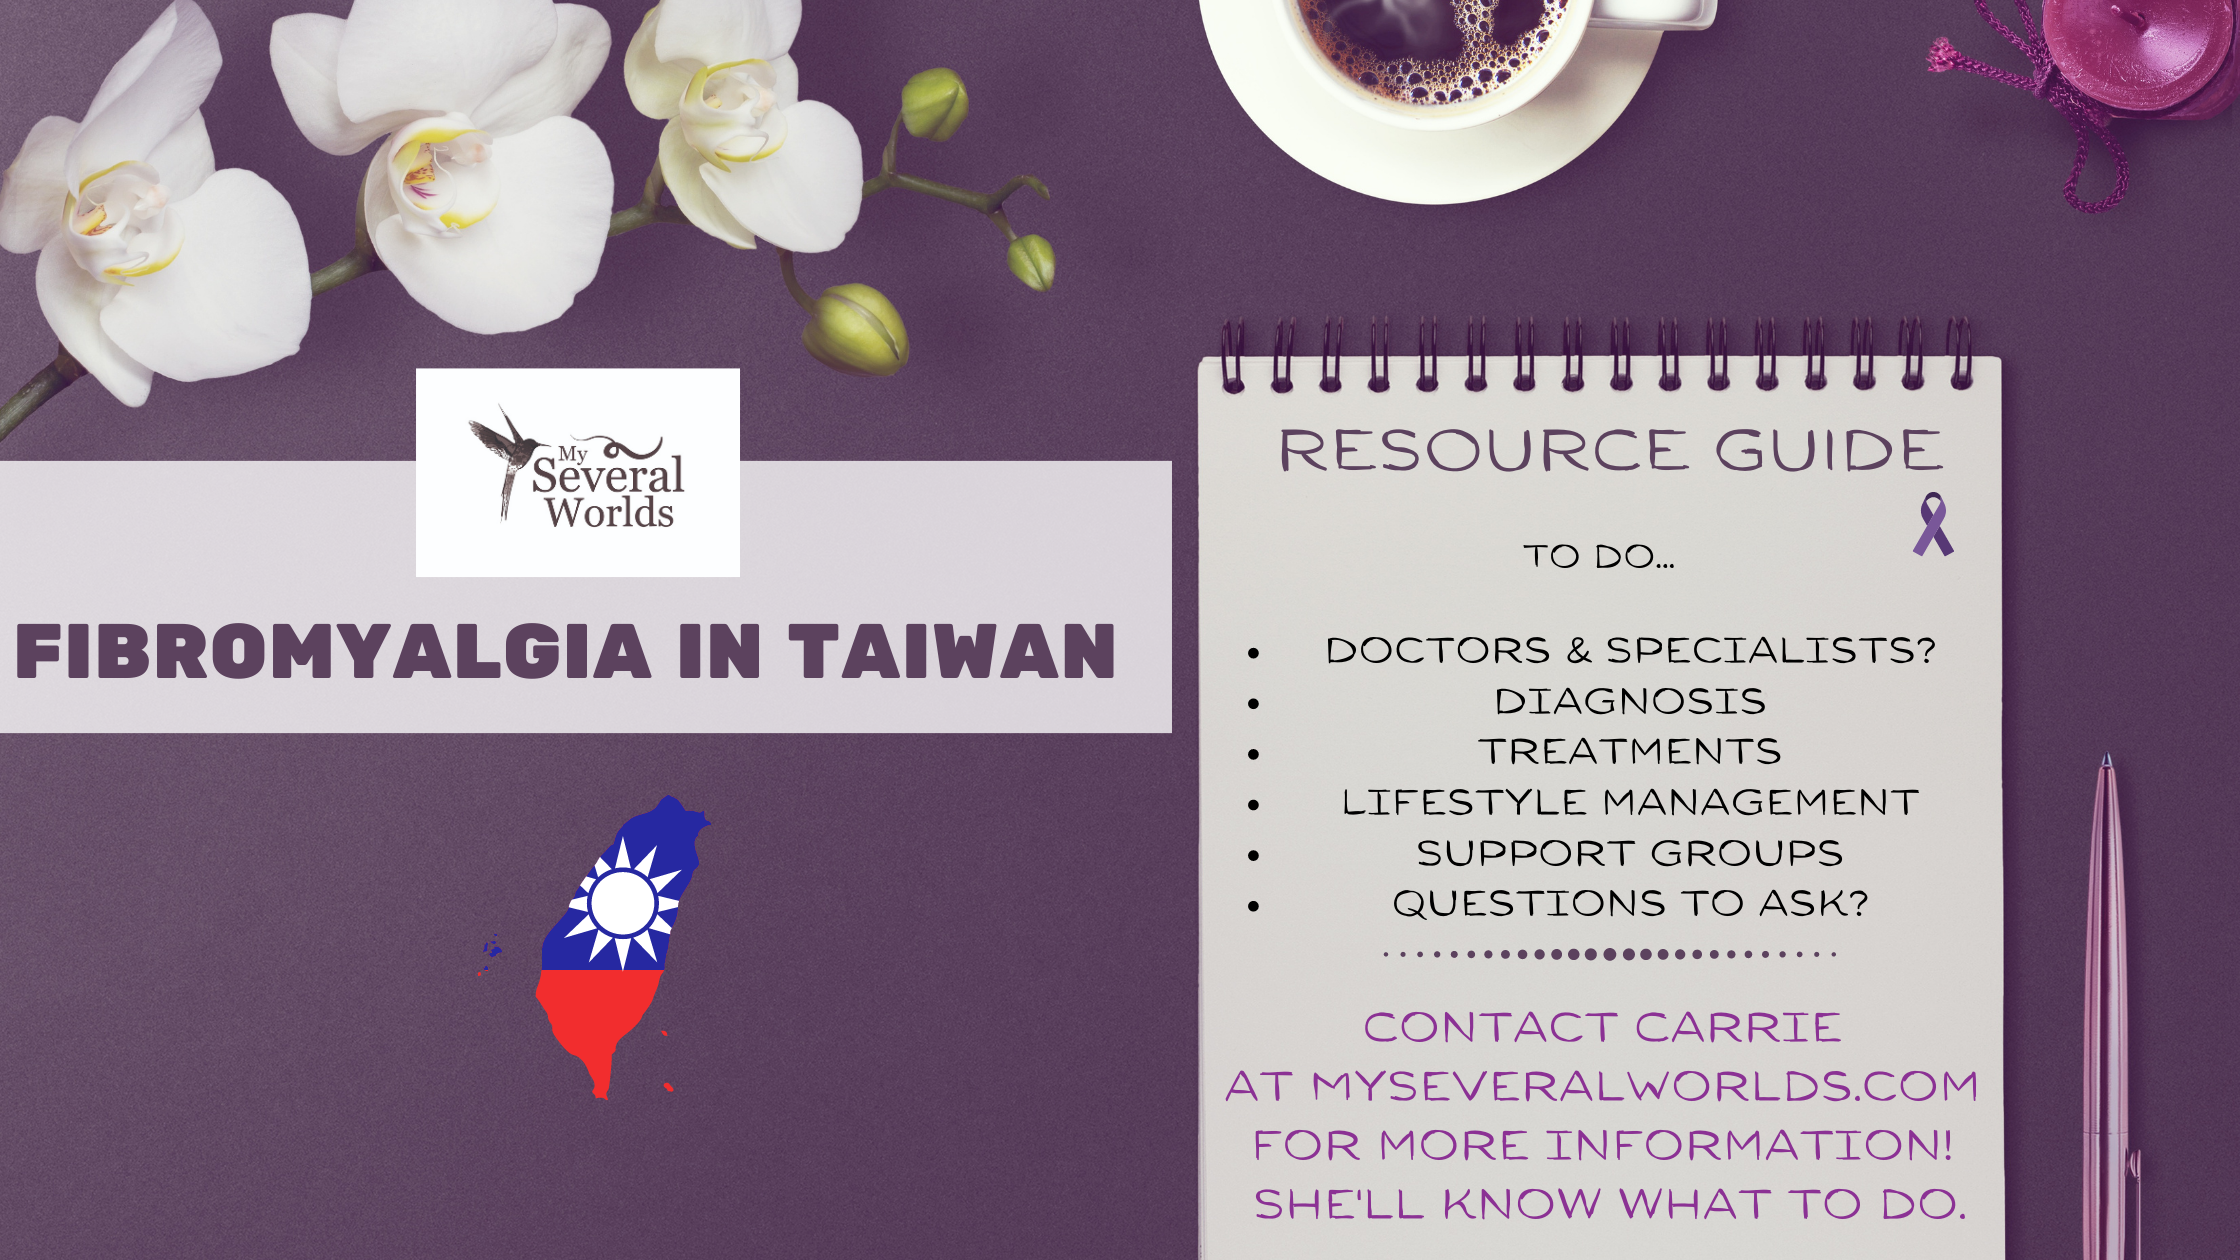 Information for Fibromyalgia Patients in Taiwan